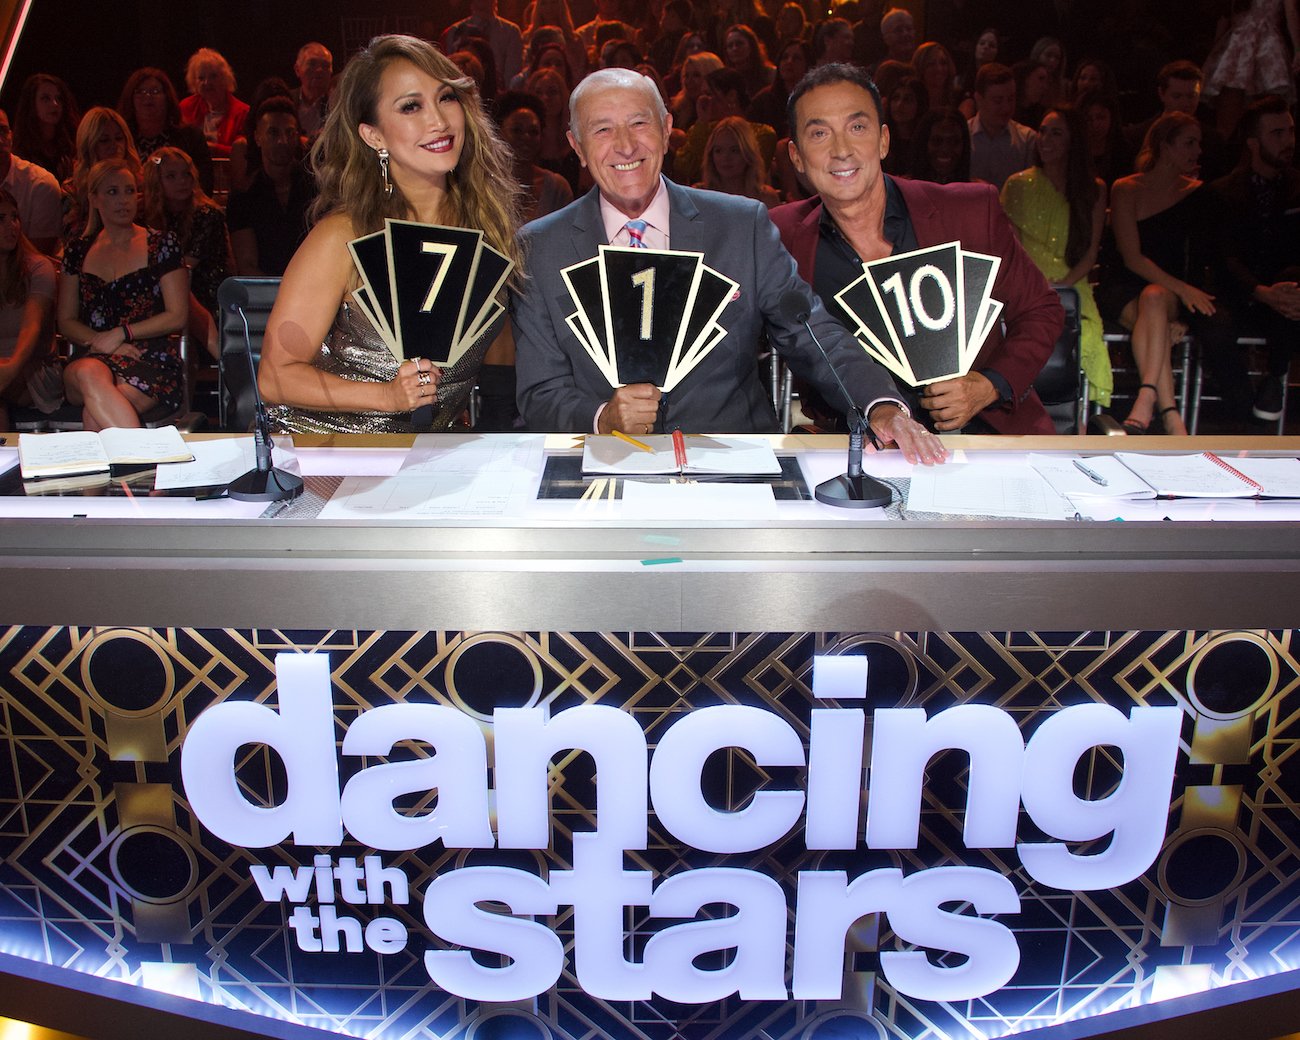 'Dancing with the Stars' judges Carrie Ann Inaba, Len Goodman, and Bruno Tonioli, who are expected to return in season 31